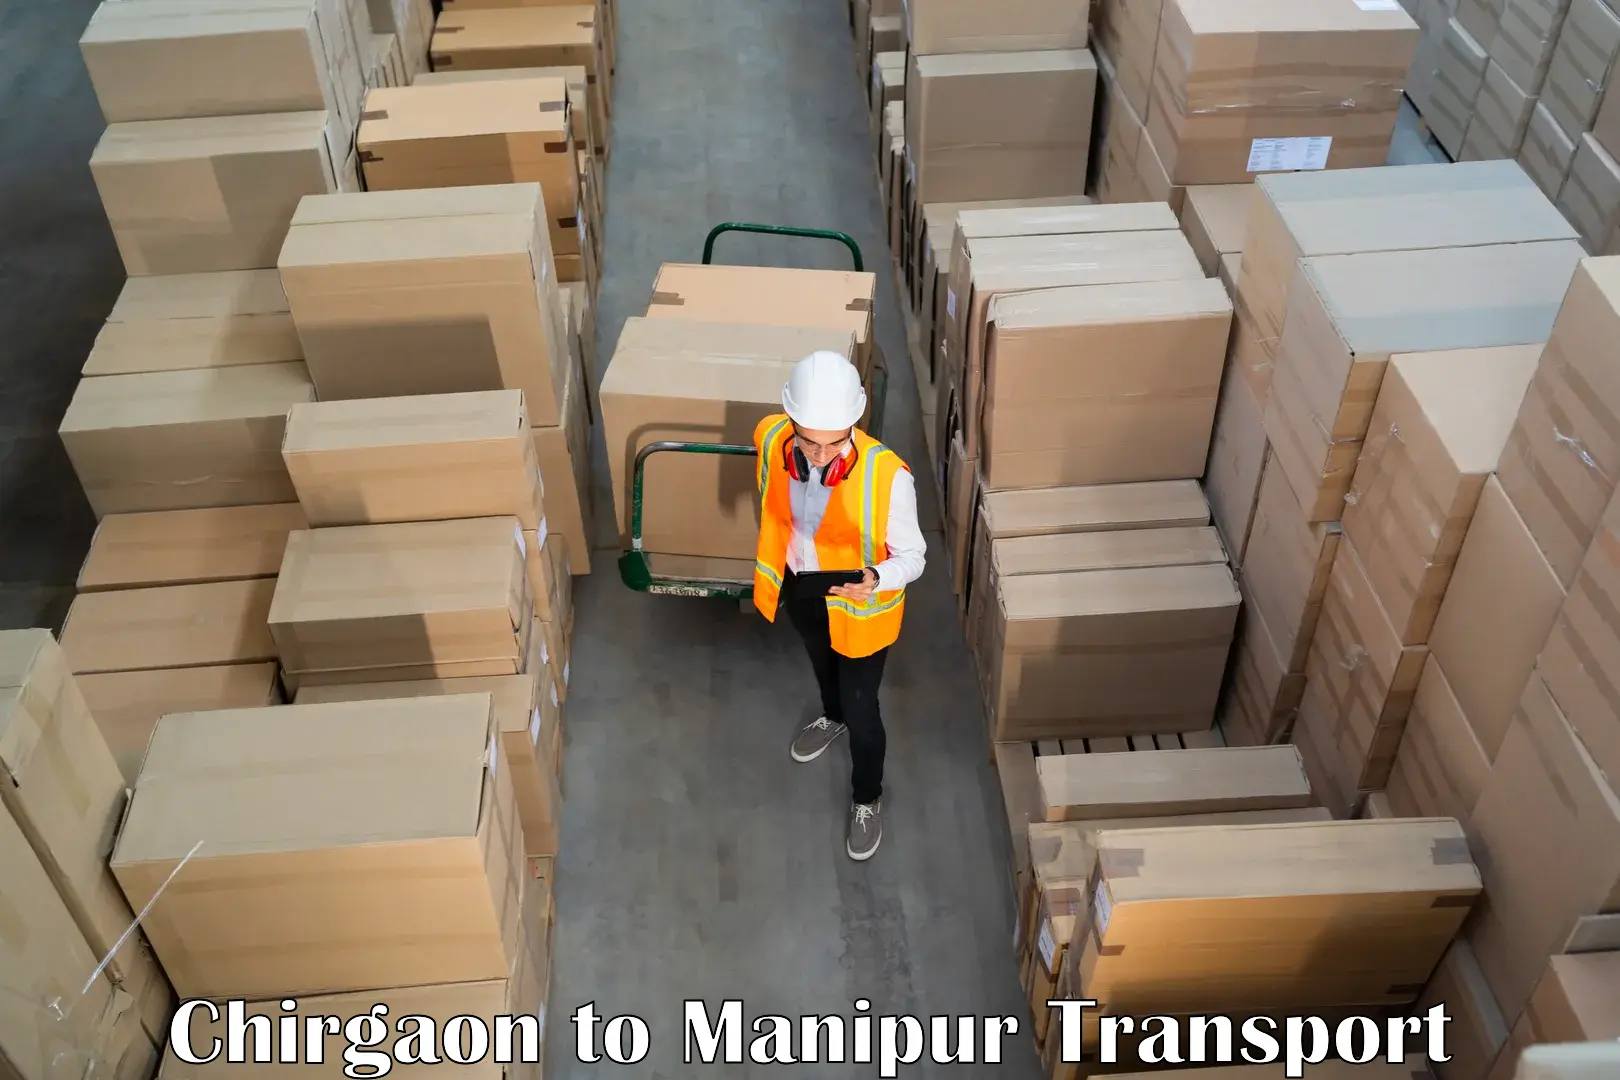 Two wheeler parcel service Chirgaon to Manipur